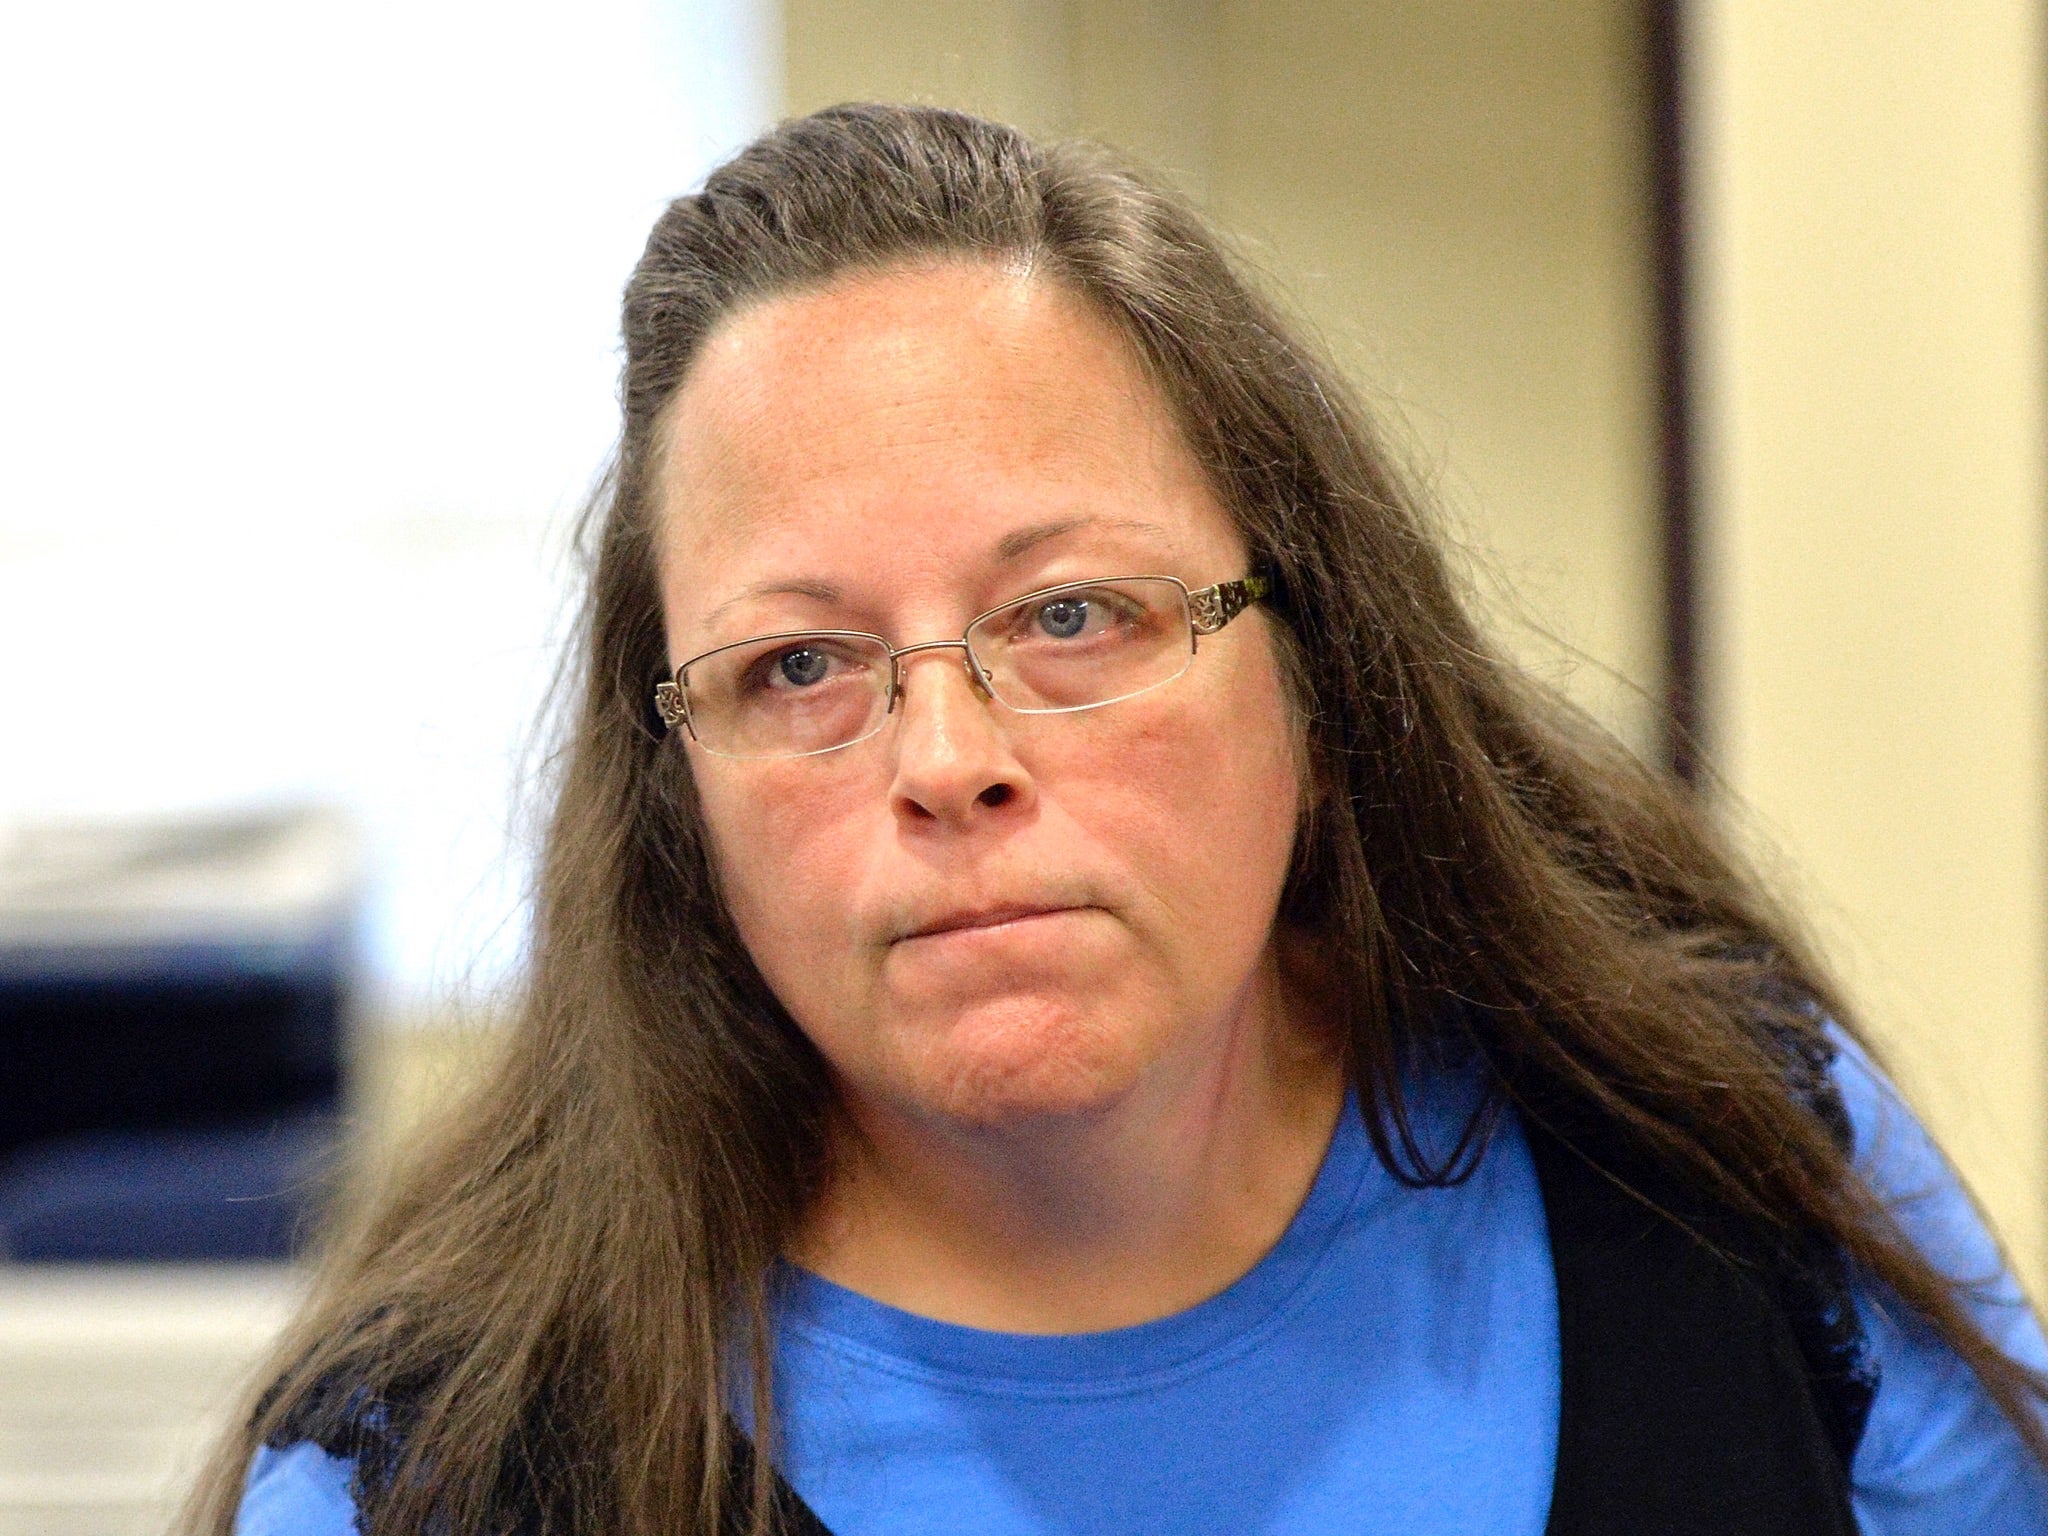 Kim Davis went to jail for six days for refusing to issue same-sex marriage licenses, citing her biblical opposition